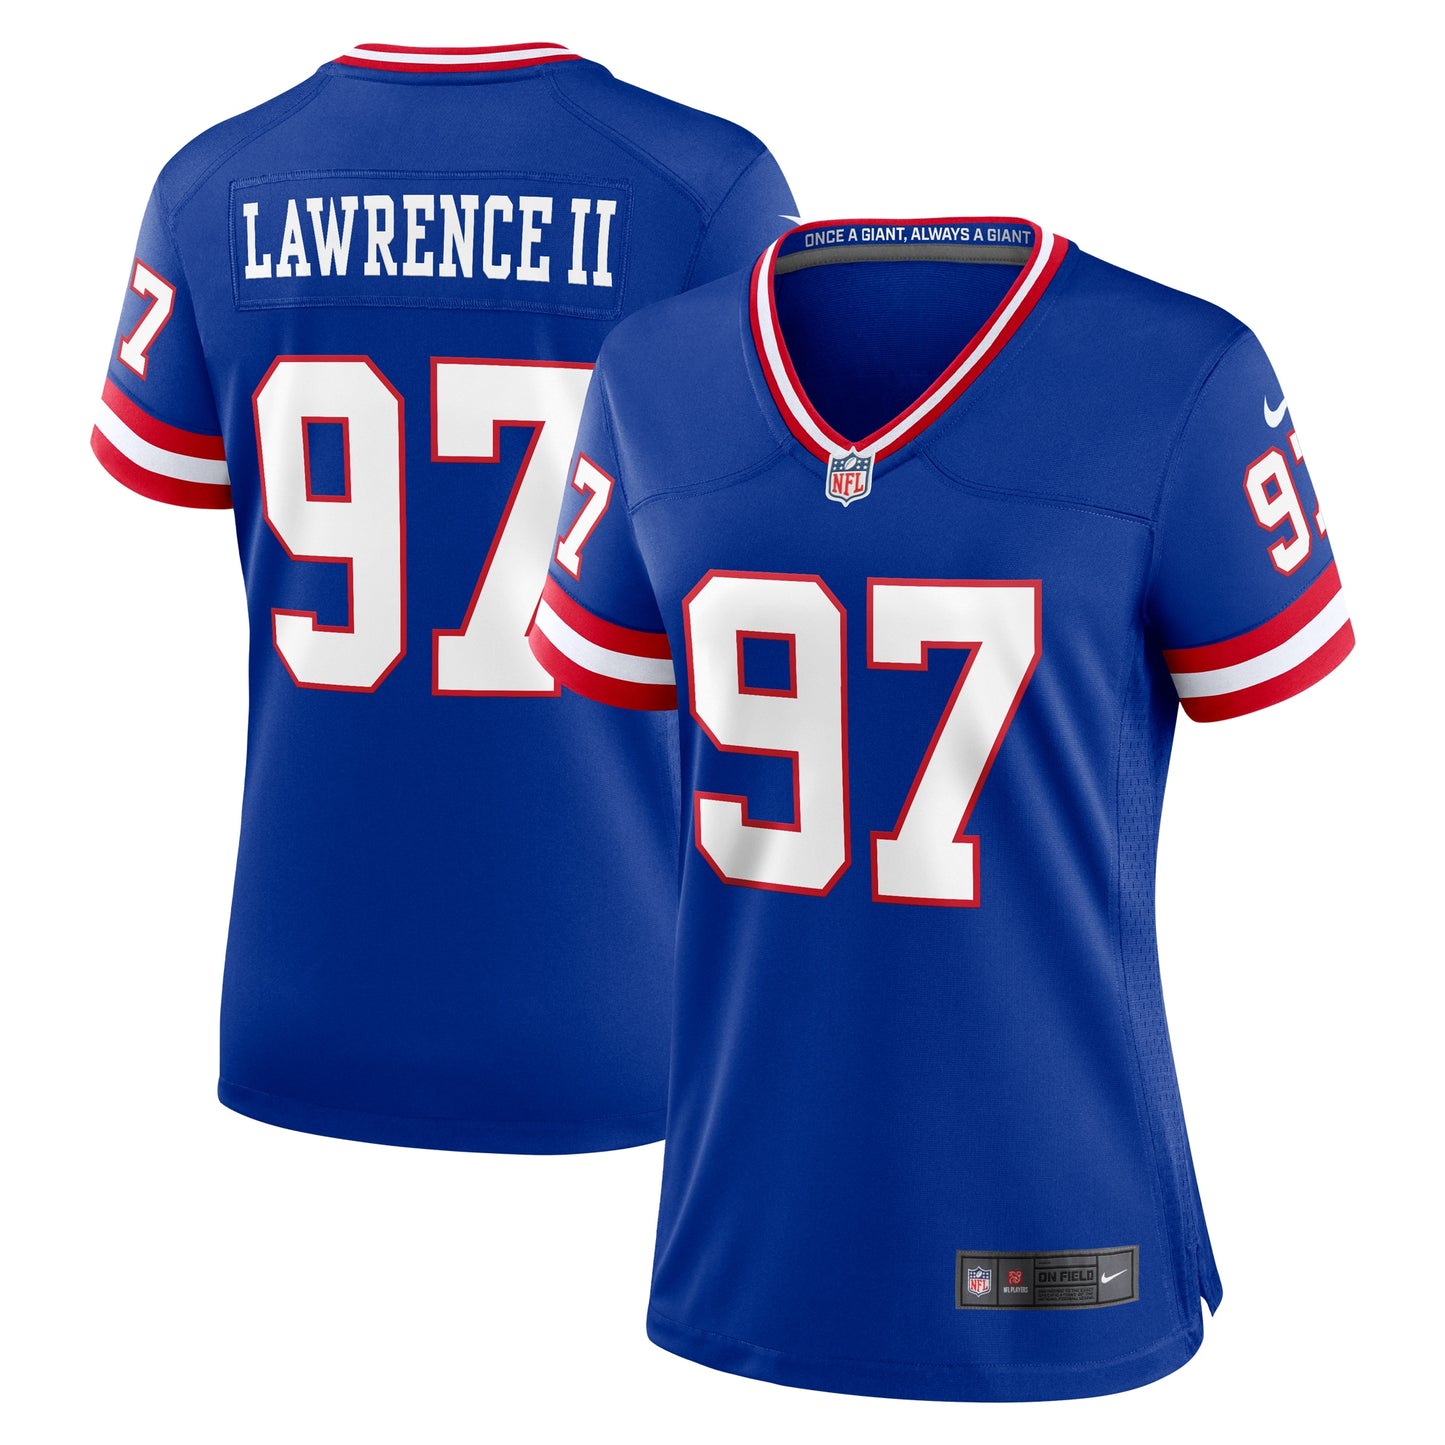 Dexter Lawrence II New York Giants Nike Women's Classic Game Player Jersey - Royal